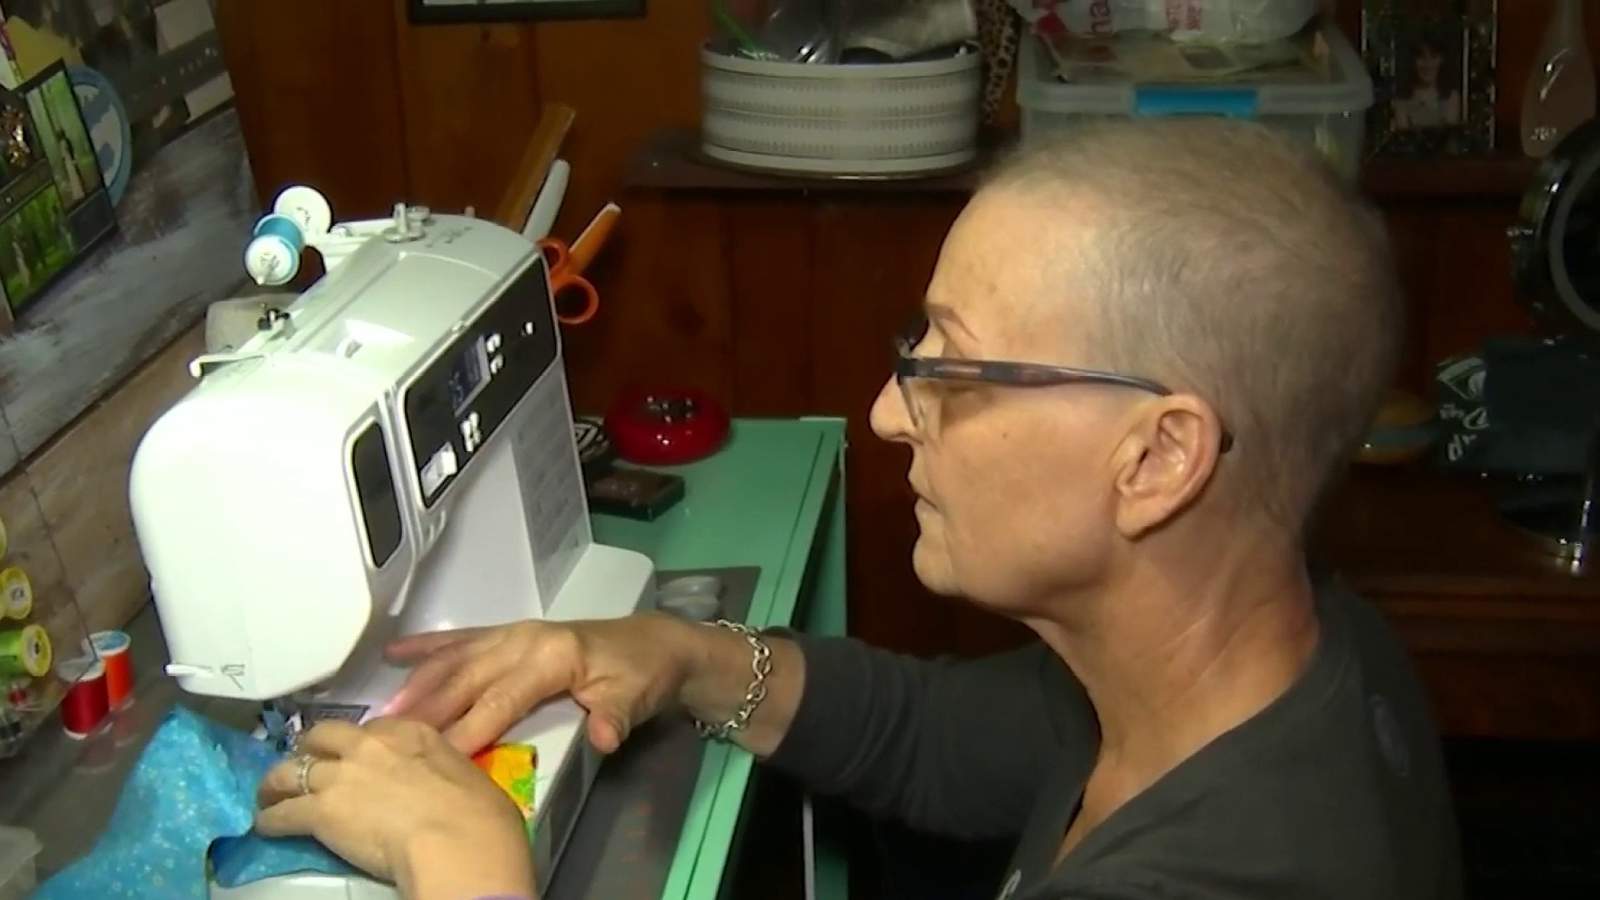 Orlando cancer patient makes coronavirus masks for at-risk groups